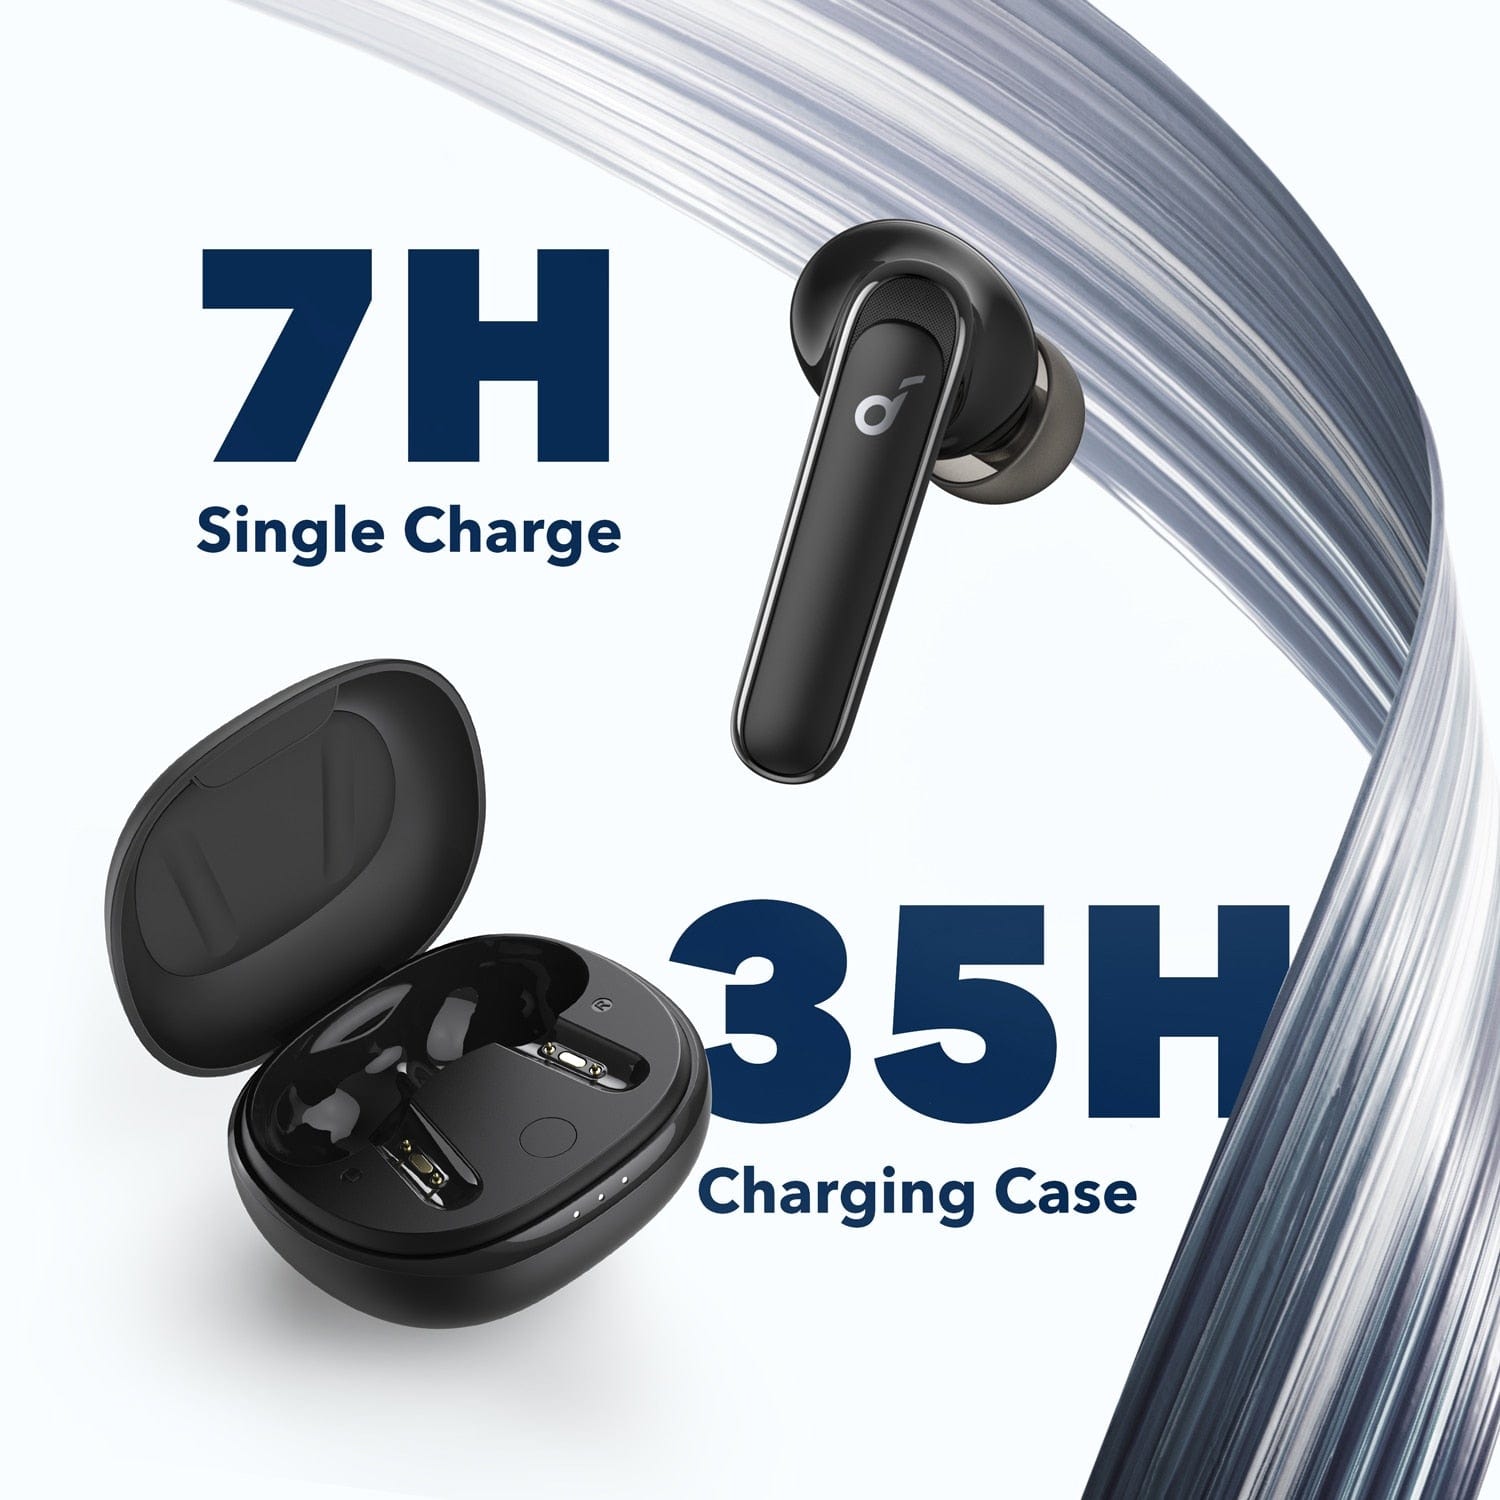 Soundcore Soundcore, Wireless Earbuds, Version  Life P3, Supports Bluetooth 5.0, Playtime up to 35 Hours, Color Black